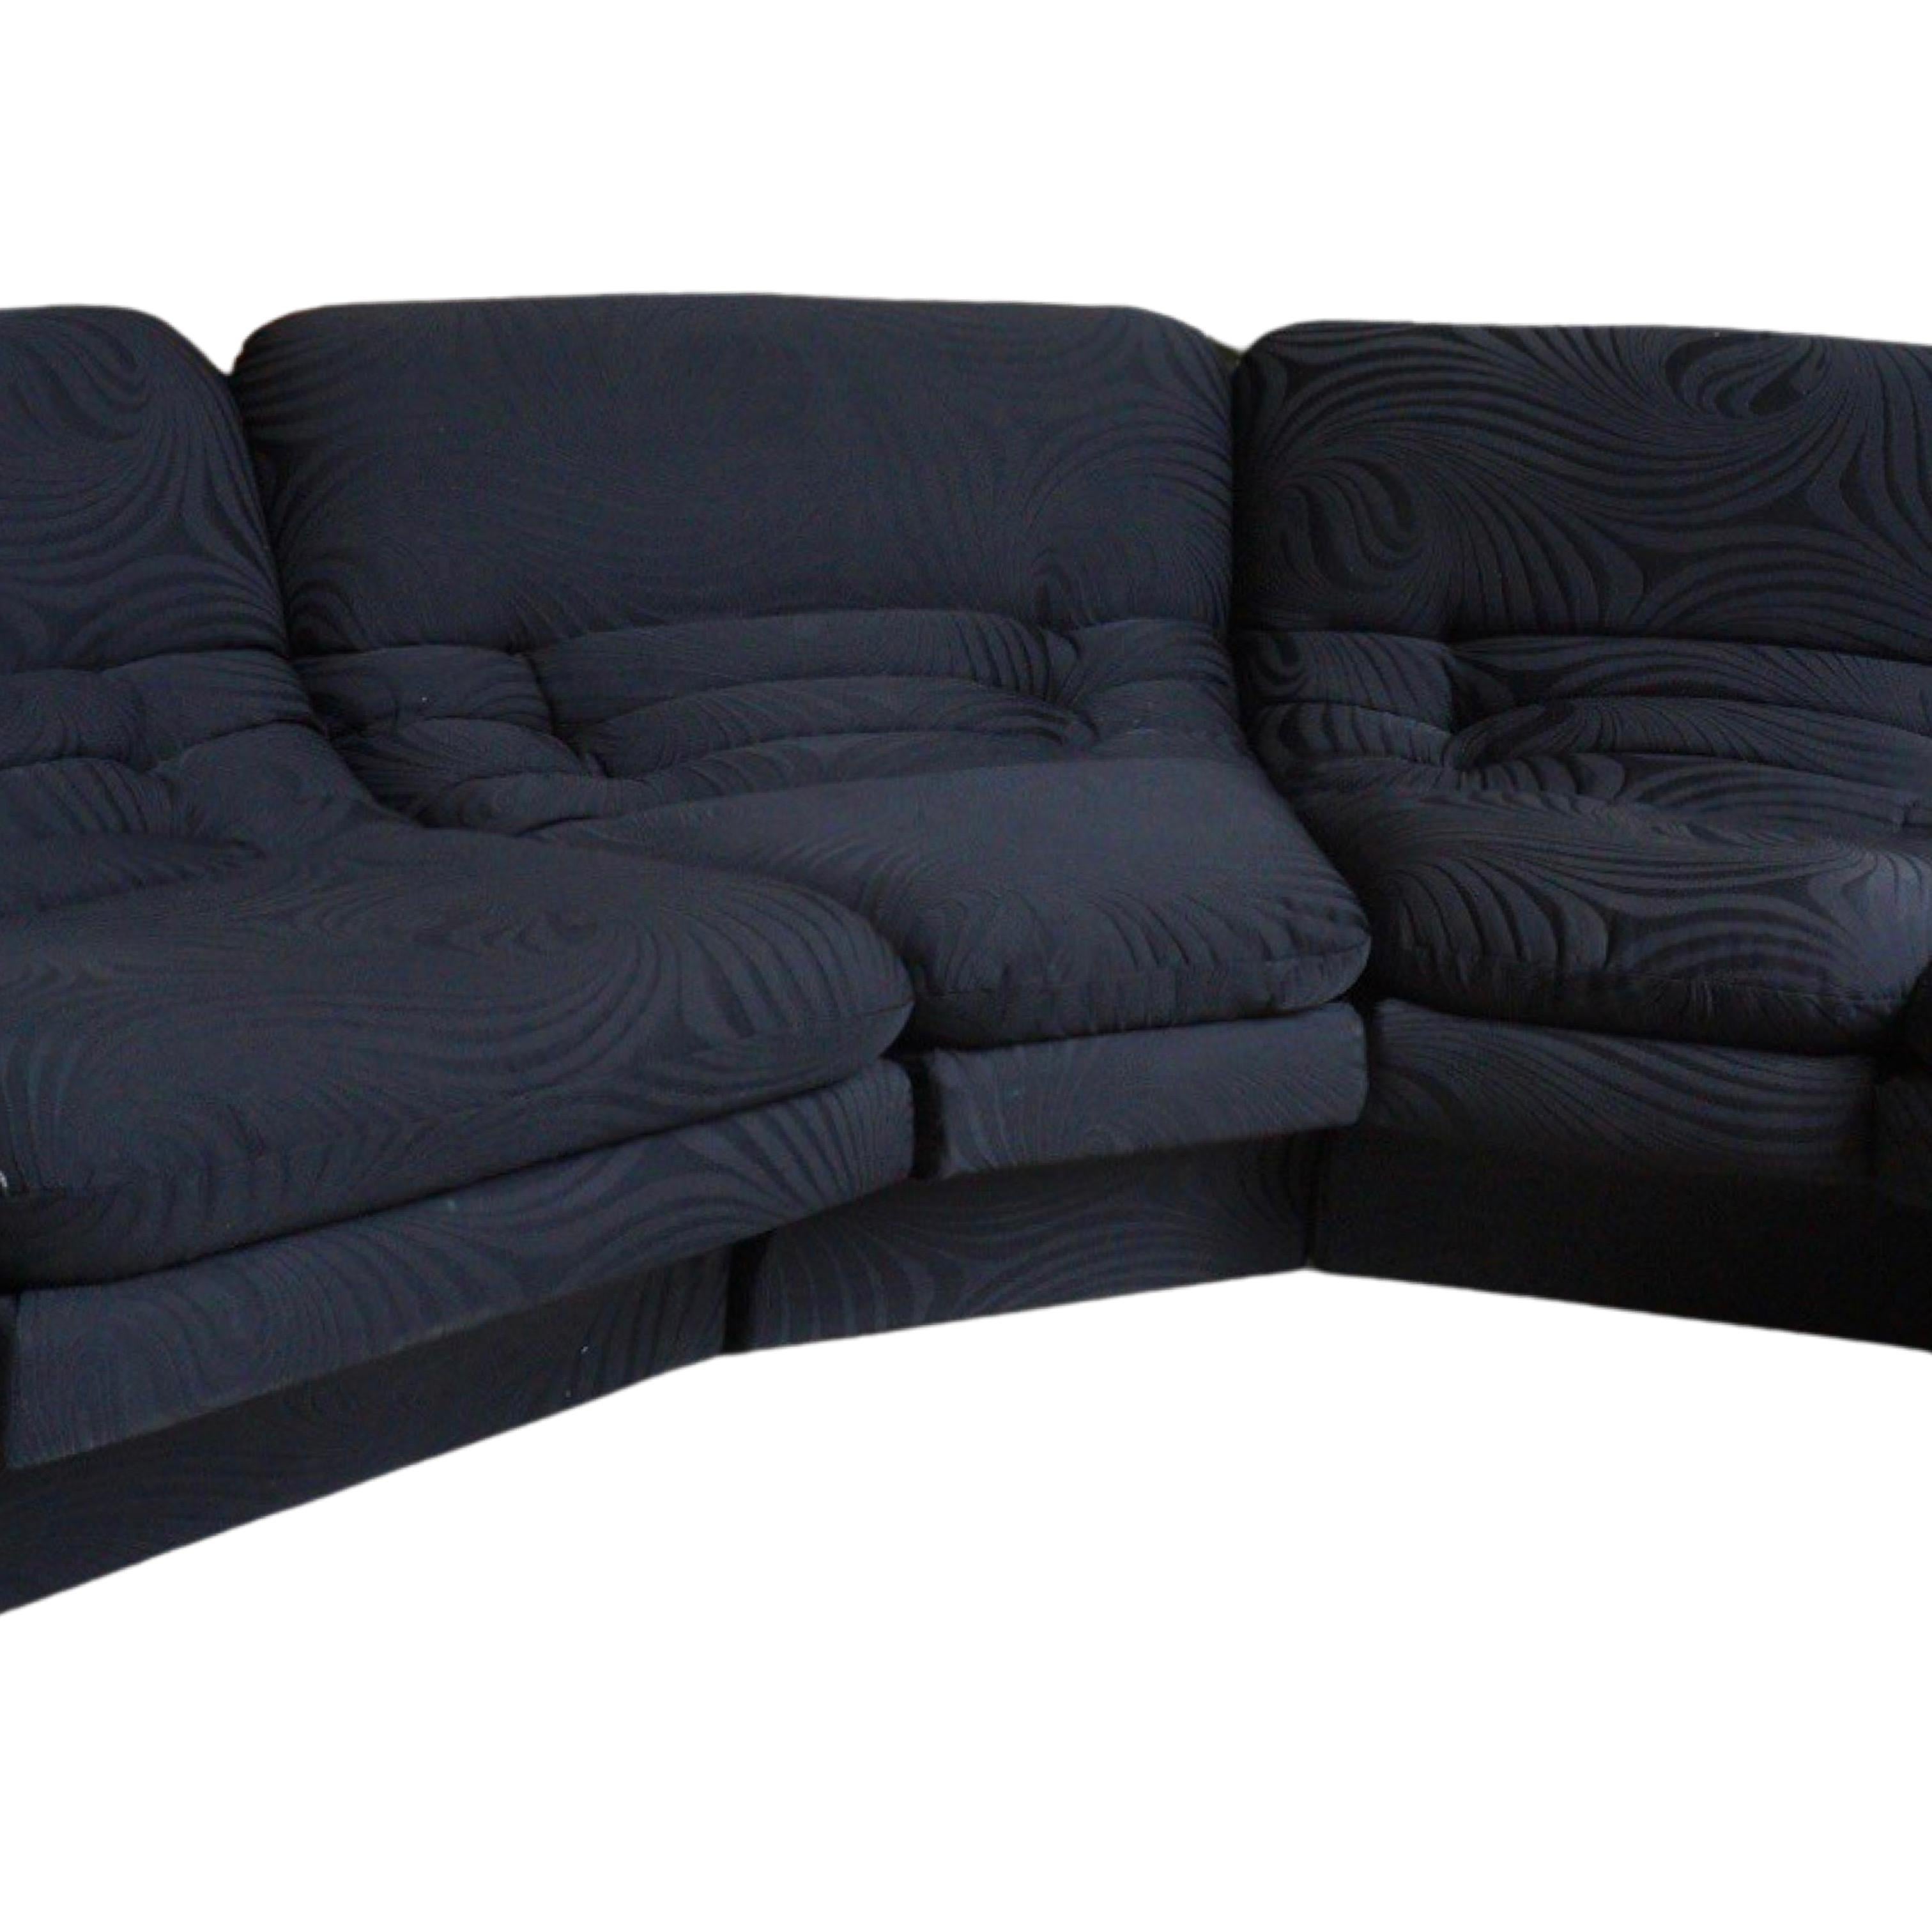 Late 20th Century Six-Piece Sectional by Carsons, 1980s For Sale